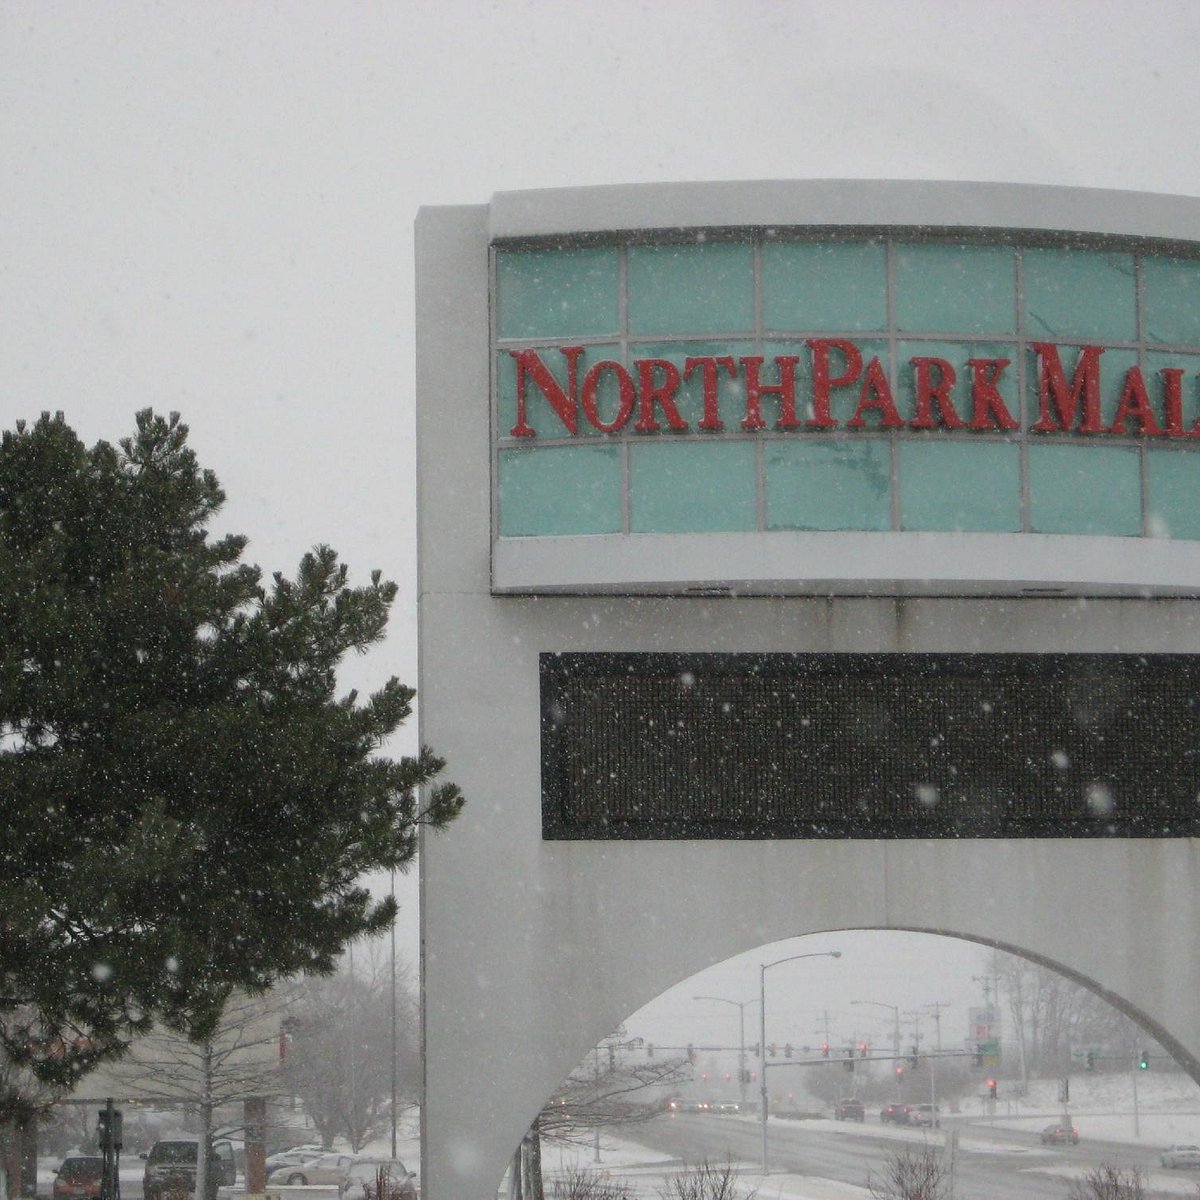 What does the future hold for NorthPark Mall? Davenport officials